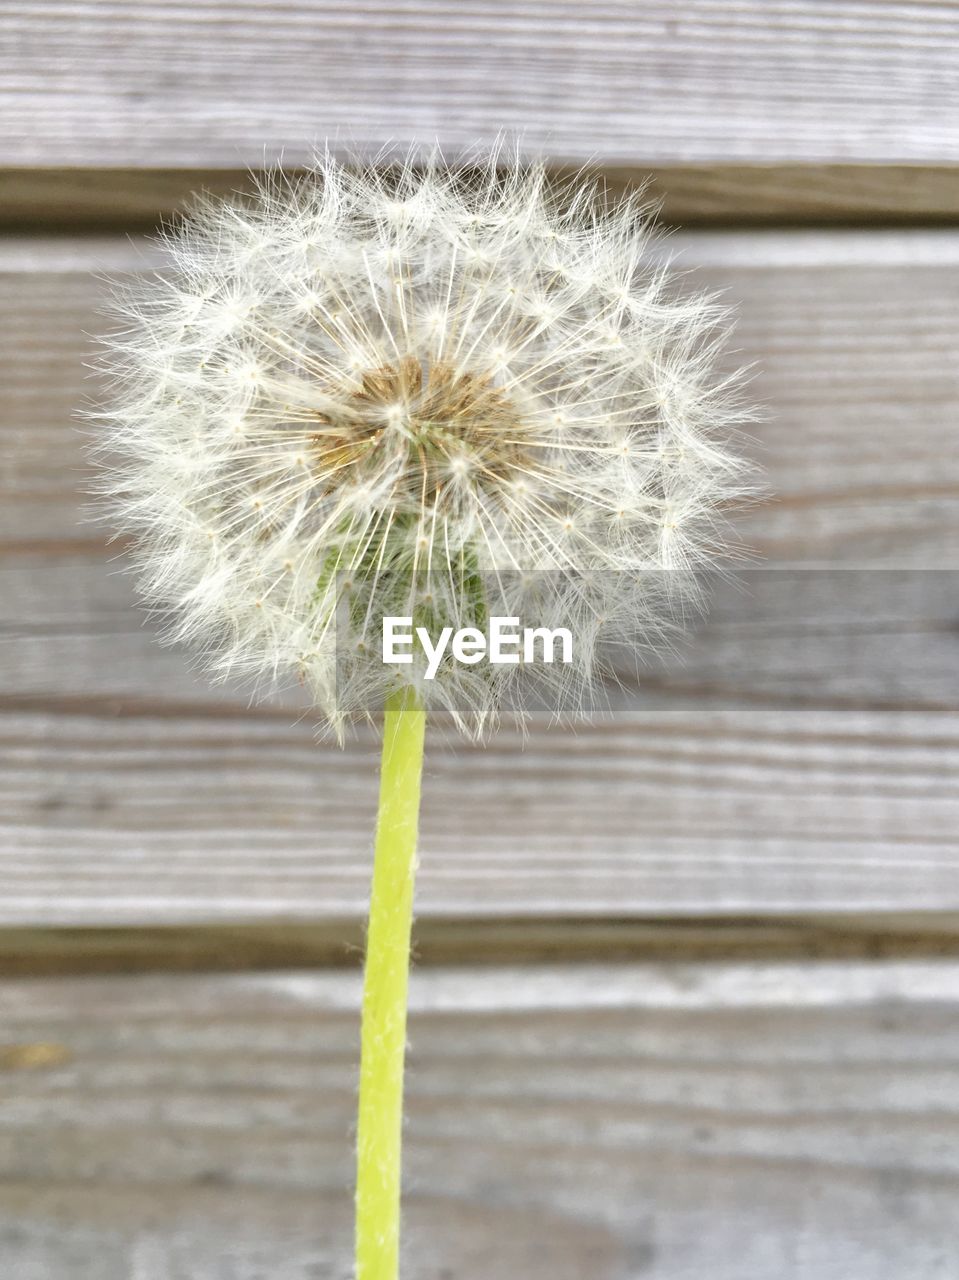 CLOSE-UP OF DANDELION AGAINST WHITE WALL